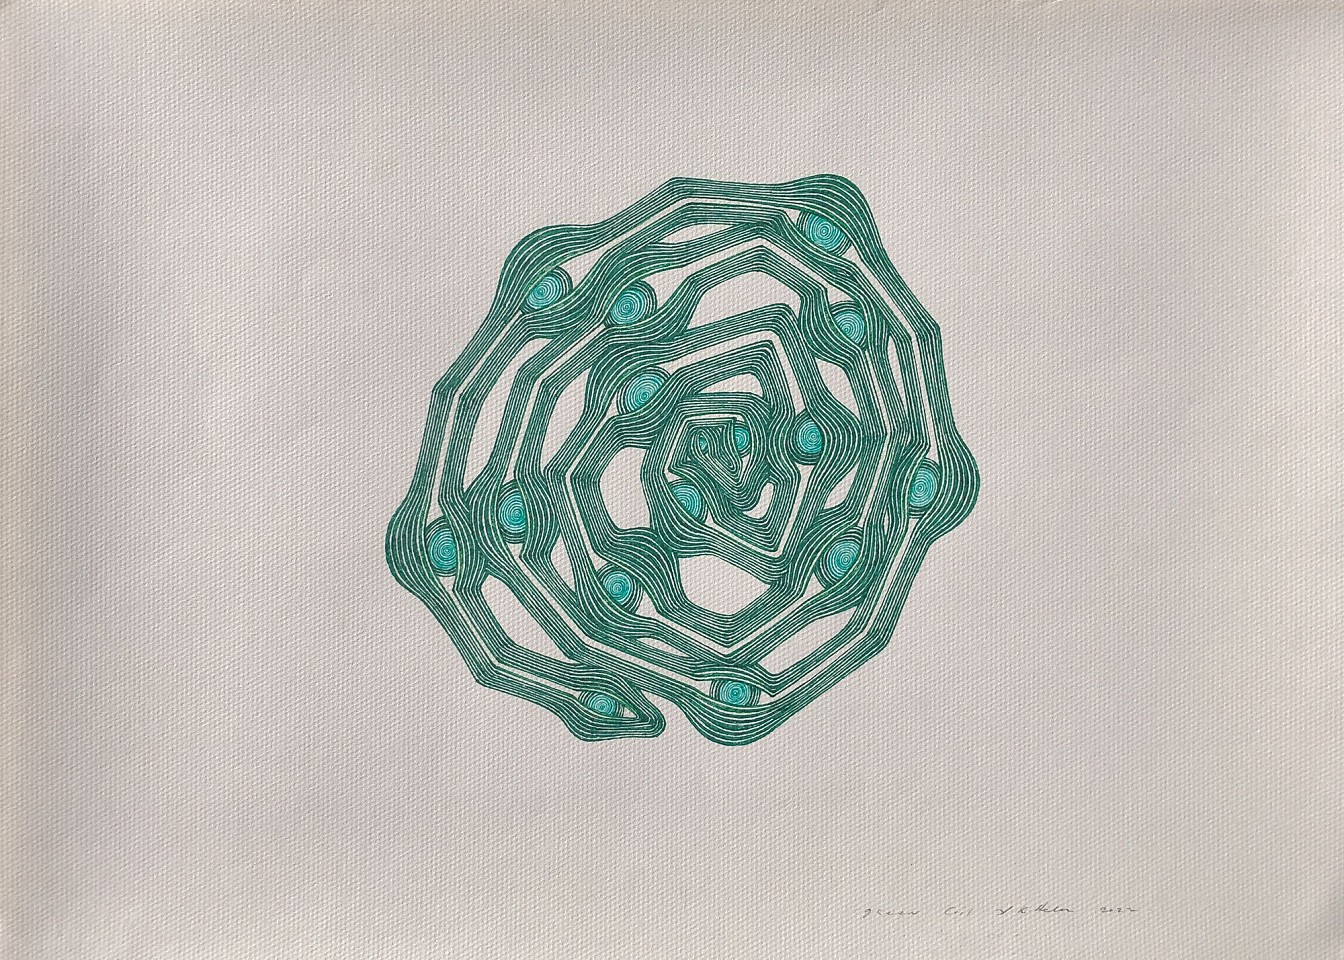 Stewart Helm, Green Coil, 2022
Green ink on paper, 15"x 20.75"
SH-653
Price Upon Request